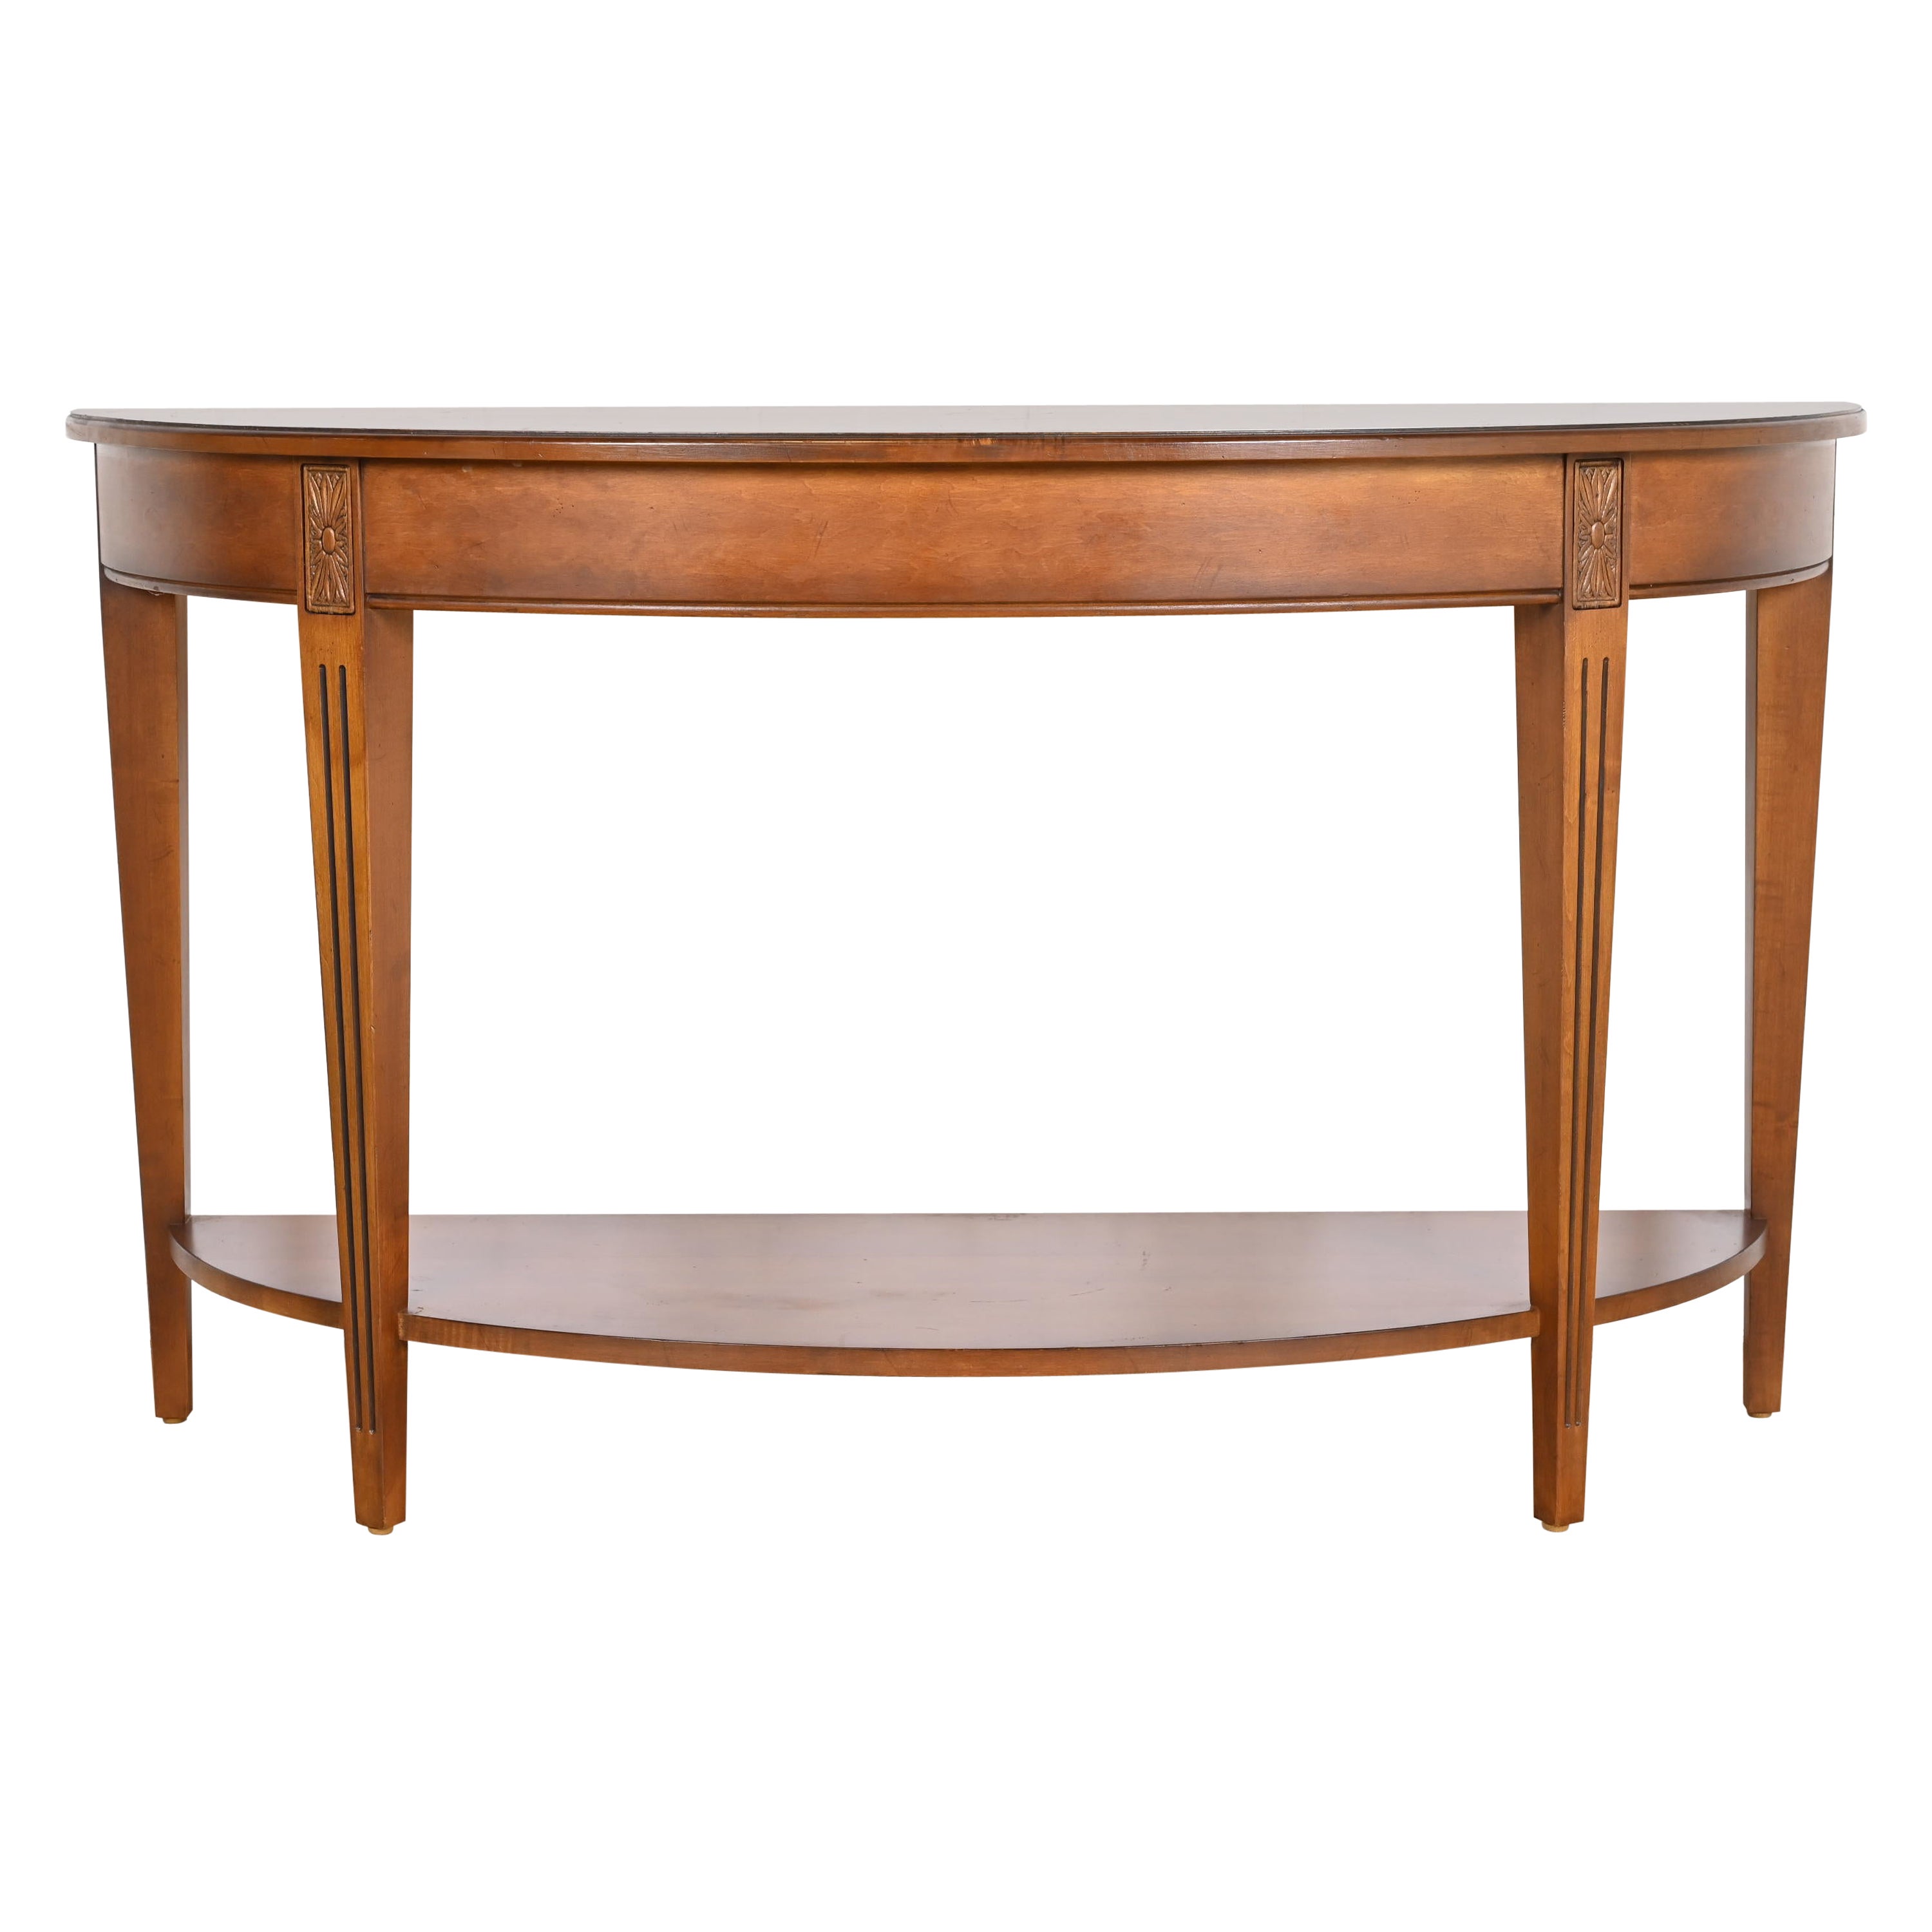 French Country Maple Demilune Console Table or Sofa Table For Sale